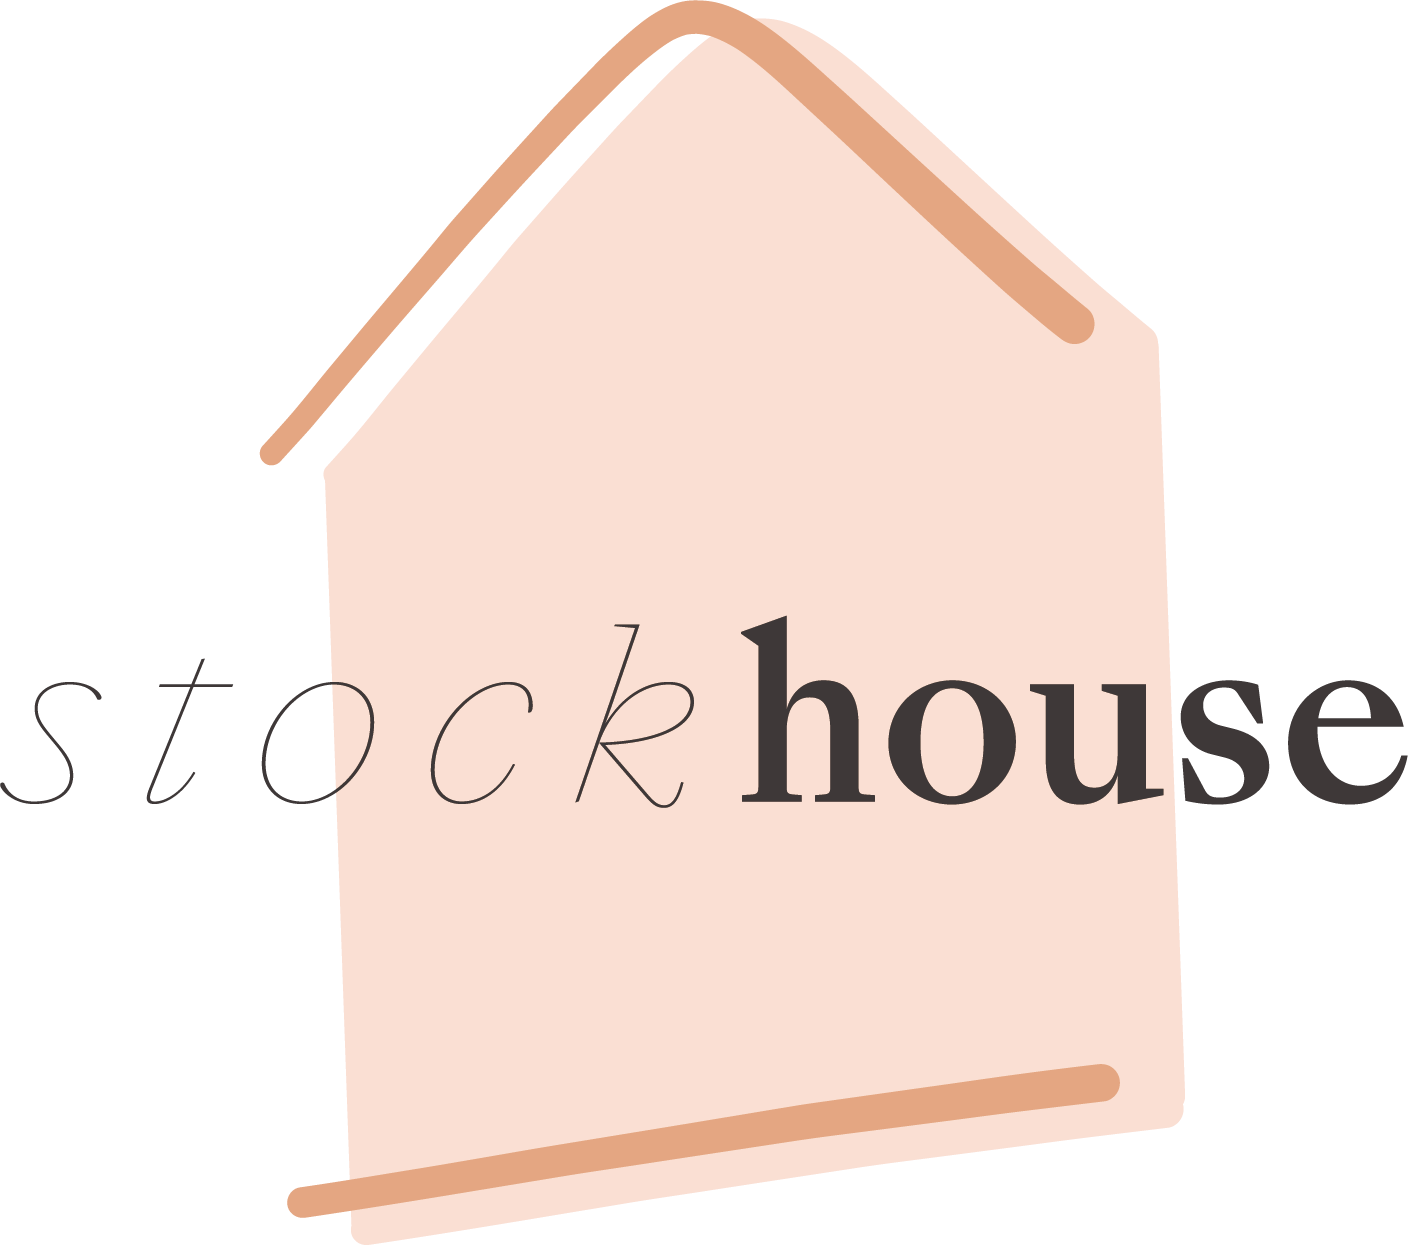 Styled Stock House - Modern Stock Photos for Creative Businesses